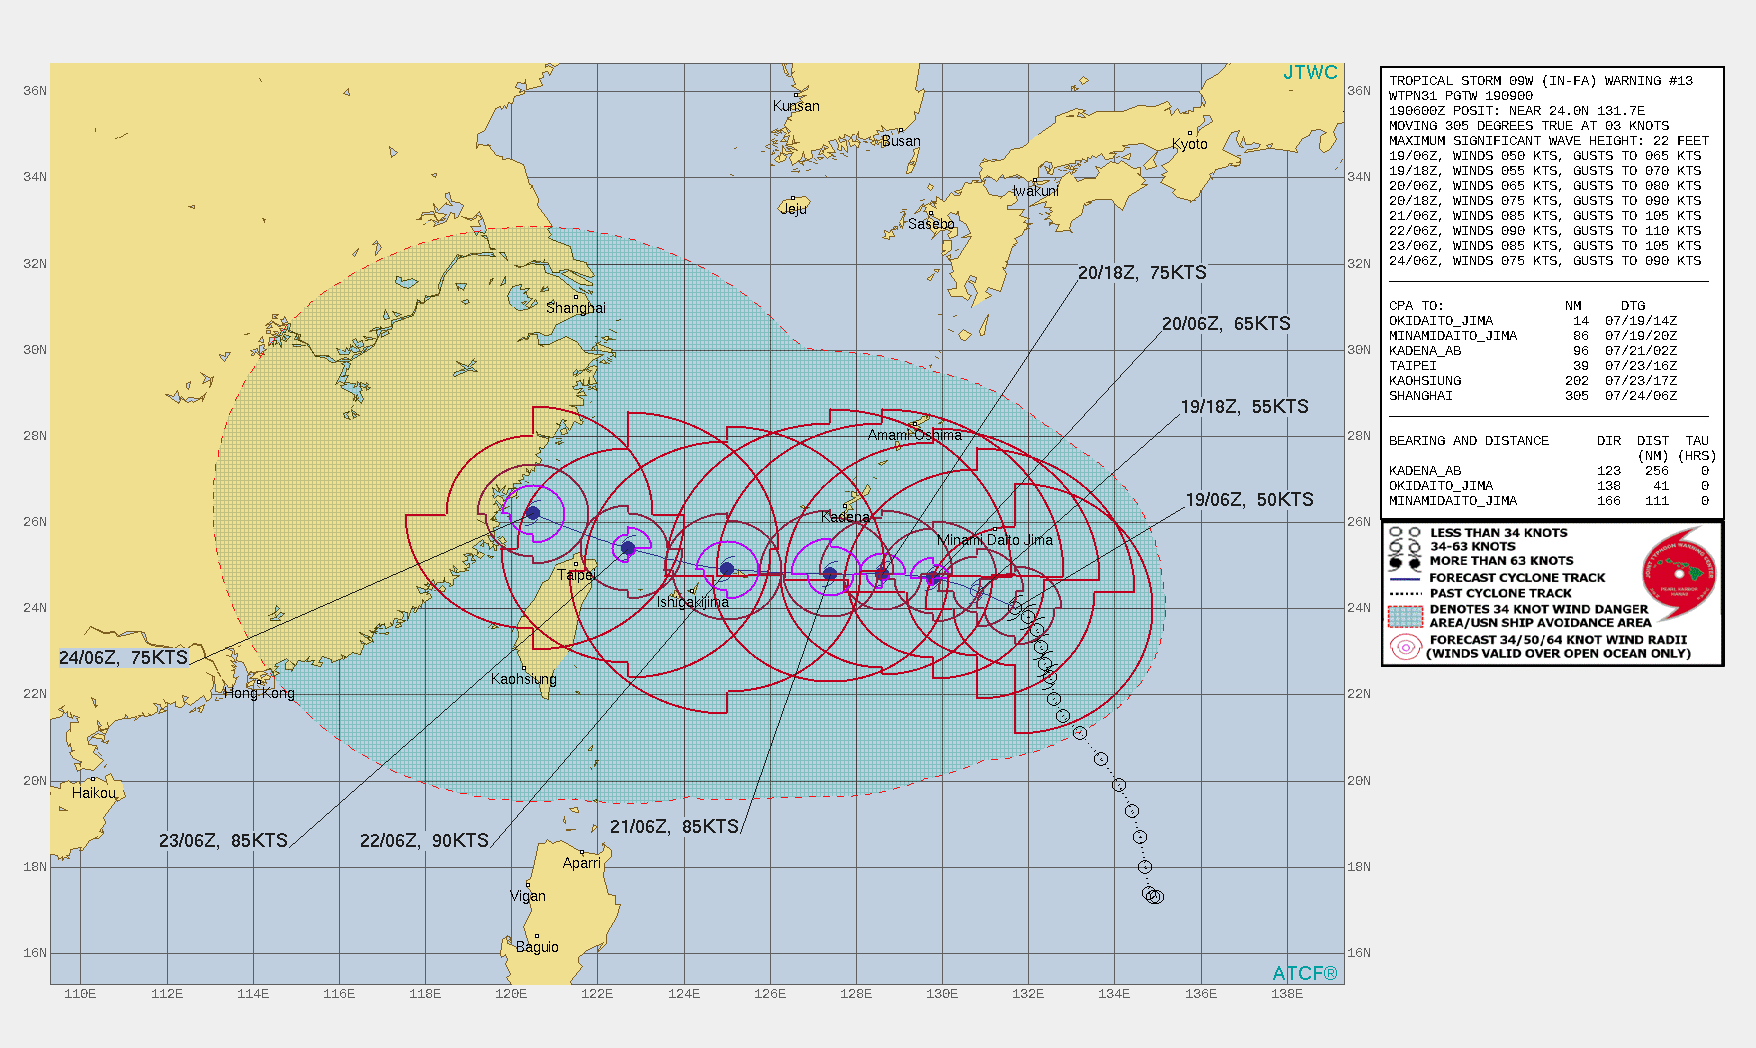 TS 09W(IN-FA). WARNING 13 ISSUED AT 19/09UTC. SIGNIFICANT FORECAST CHANGES: THERE ARE NO SIGNIFICANT CHANGES TO THE FORECAST FROM THE PREVIOUS WARNING.  FORECAST DISCUSSION: TS 09W IS EXPECTED TO TRACK WEST-NORTHWESTWARD TO WESTWARD ALONG THE SOUTHERN PERIPHERY OF THE STR THROUGH 72H. AFTER 72H, TS 09W SHOULD TURN WEST-NORTHWESTWARD AS IT TRACKS ALONG THE SOUTHWESTERN PERIPHERY OF THE SUBTROPICAL RIDGE. TS 09W SHOULD STEADILY INTENSIFY THROUGH 72H TO A PEAK INTENSITY OF 90 KNOTS/CAT 2. AFTER  72H, TS 09W WILL WEAKEN SLIGHTLY AS IT PASSES TO THE NORTH OF TAIWAN AND APPROACHES THE COAST OF CHINA.